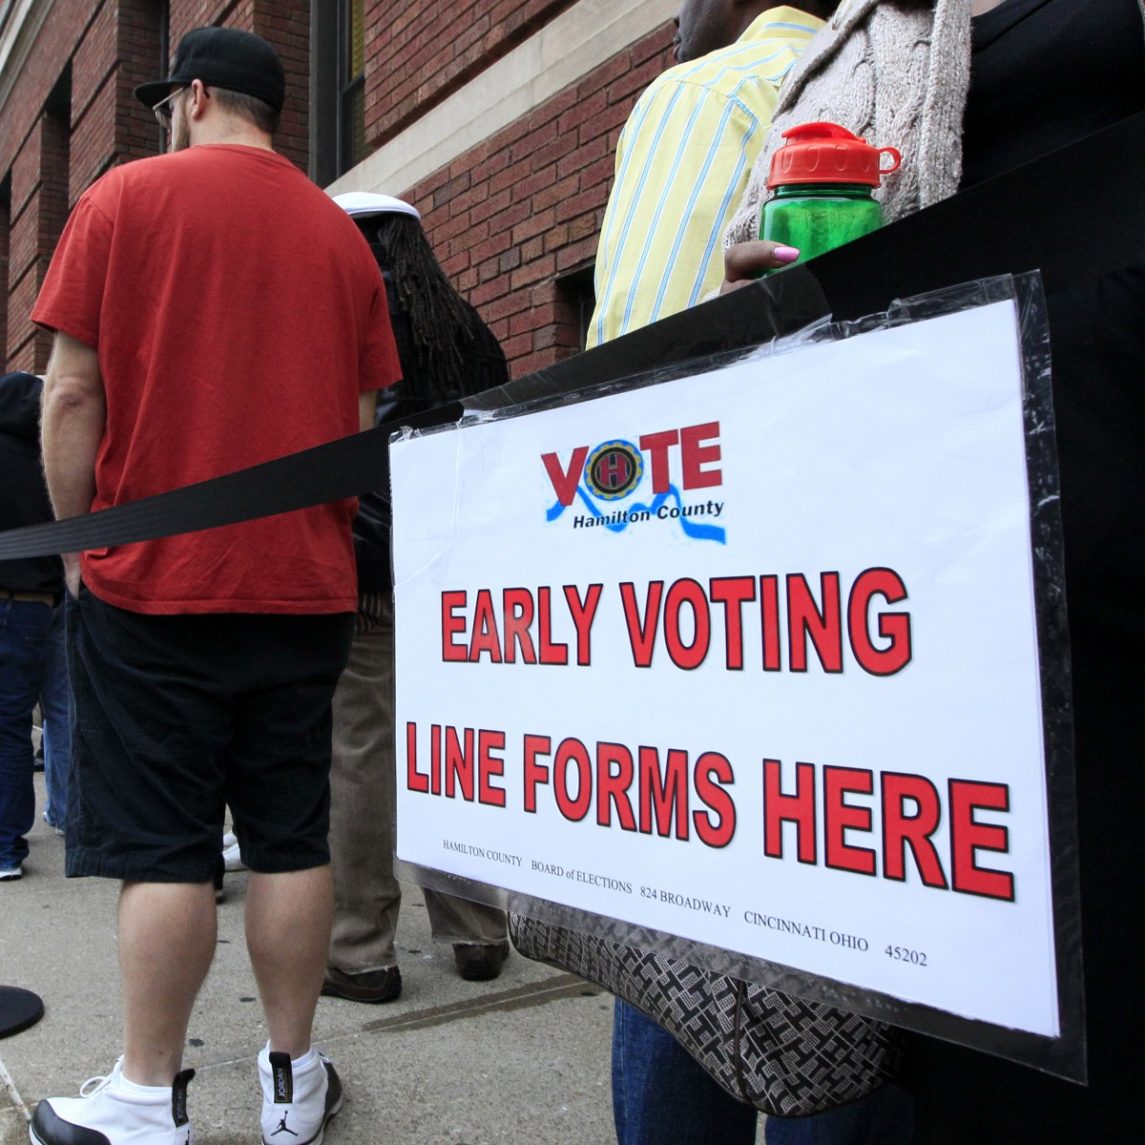 America’s Low Voter Turnout Made Worse By New Restrictions